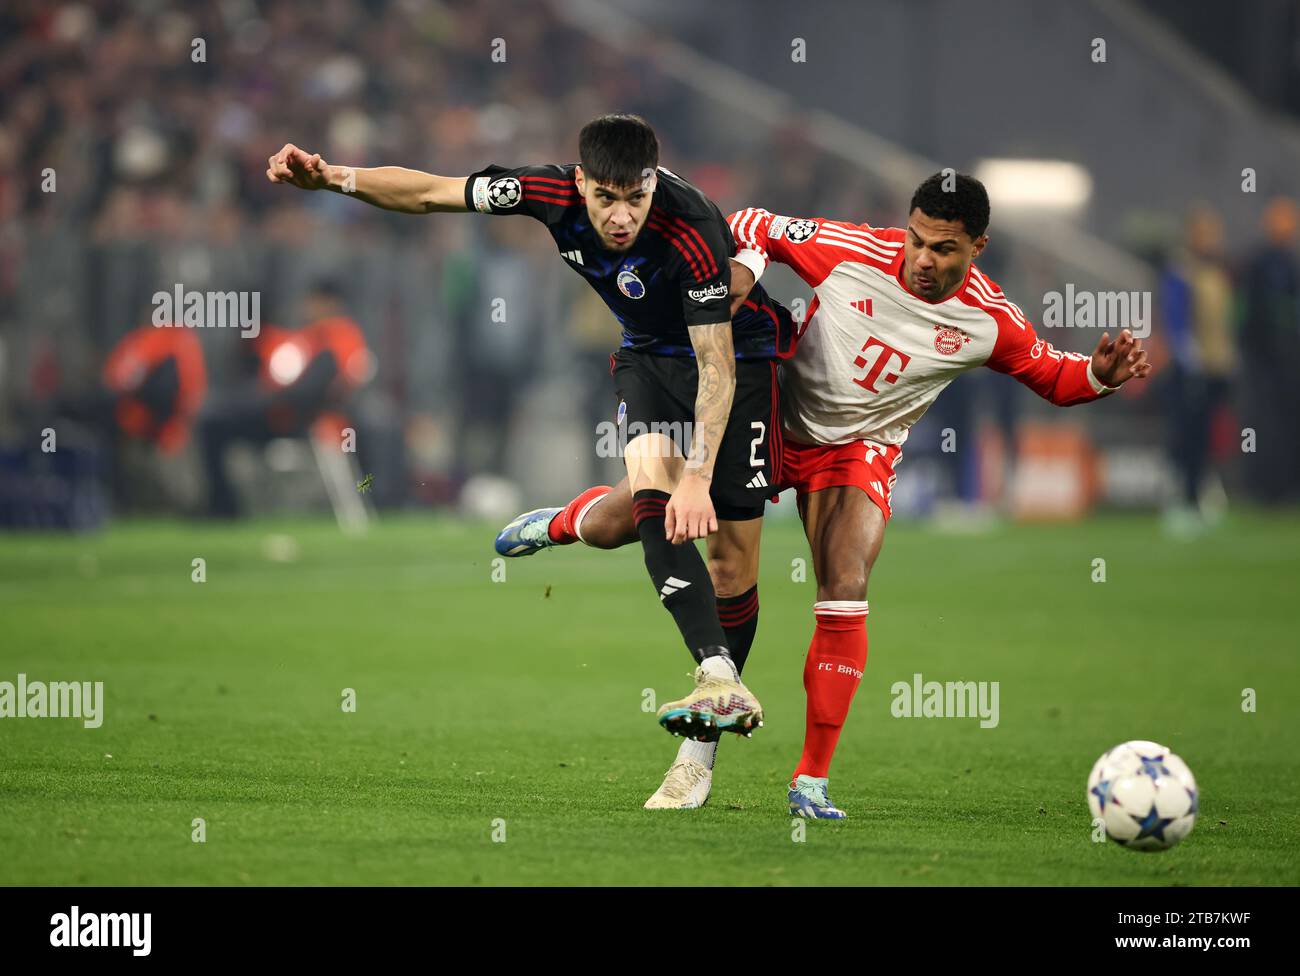 MUNICH, GERMANY - NOVEMBER 29: UEFA Champions League match between FC Bayern MŸnchen and F.C. Copenhagen at Allianz Arena on November 29, 2023 in Munich, Germany. Serge Gnabry of Bayern Muenchen Kevin Diks of FC Copenhagen  FC Bayern  MŸnchen FC Kopenhagen © diebilderwelt / Alamy Stock Stock Photo